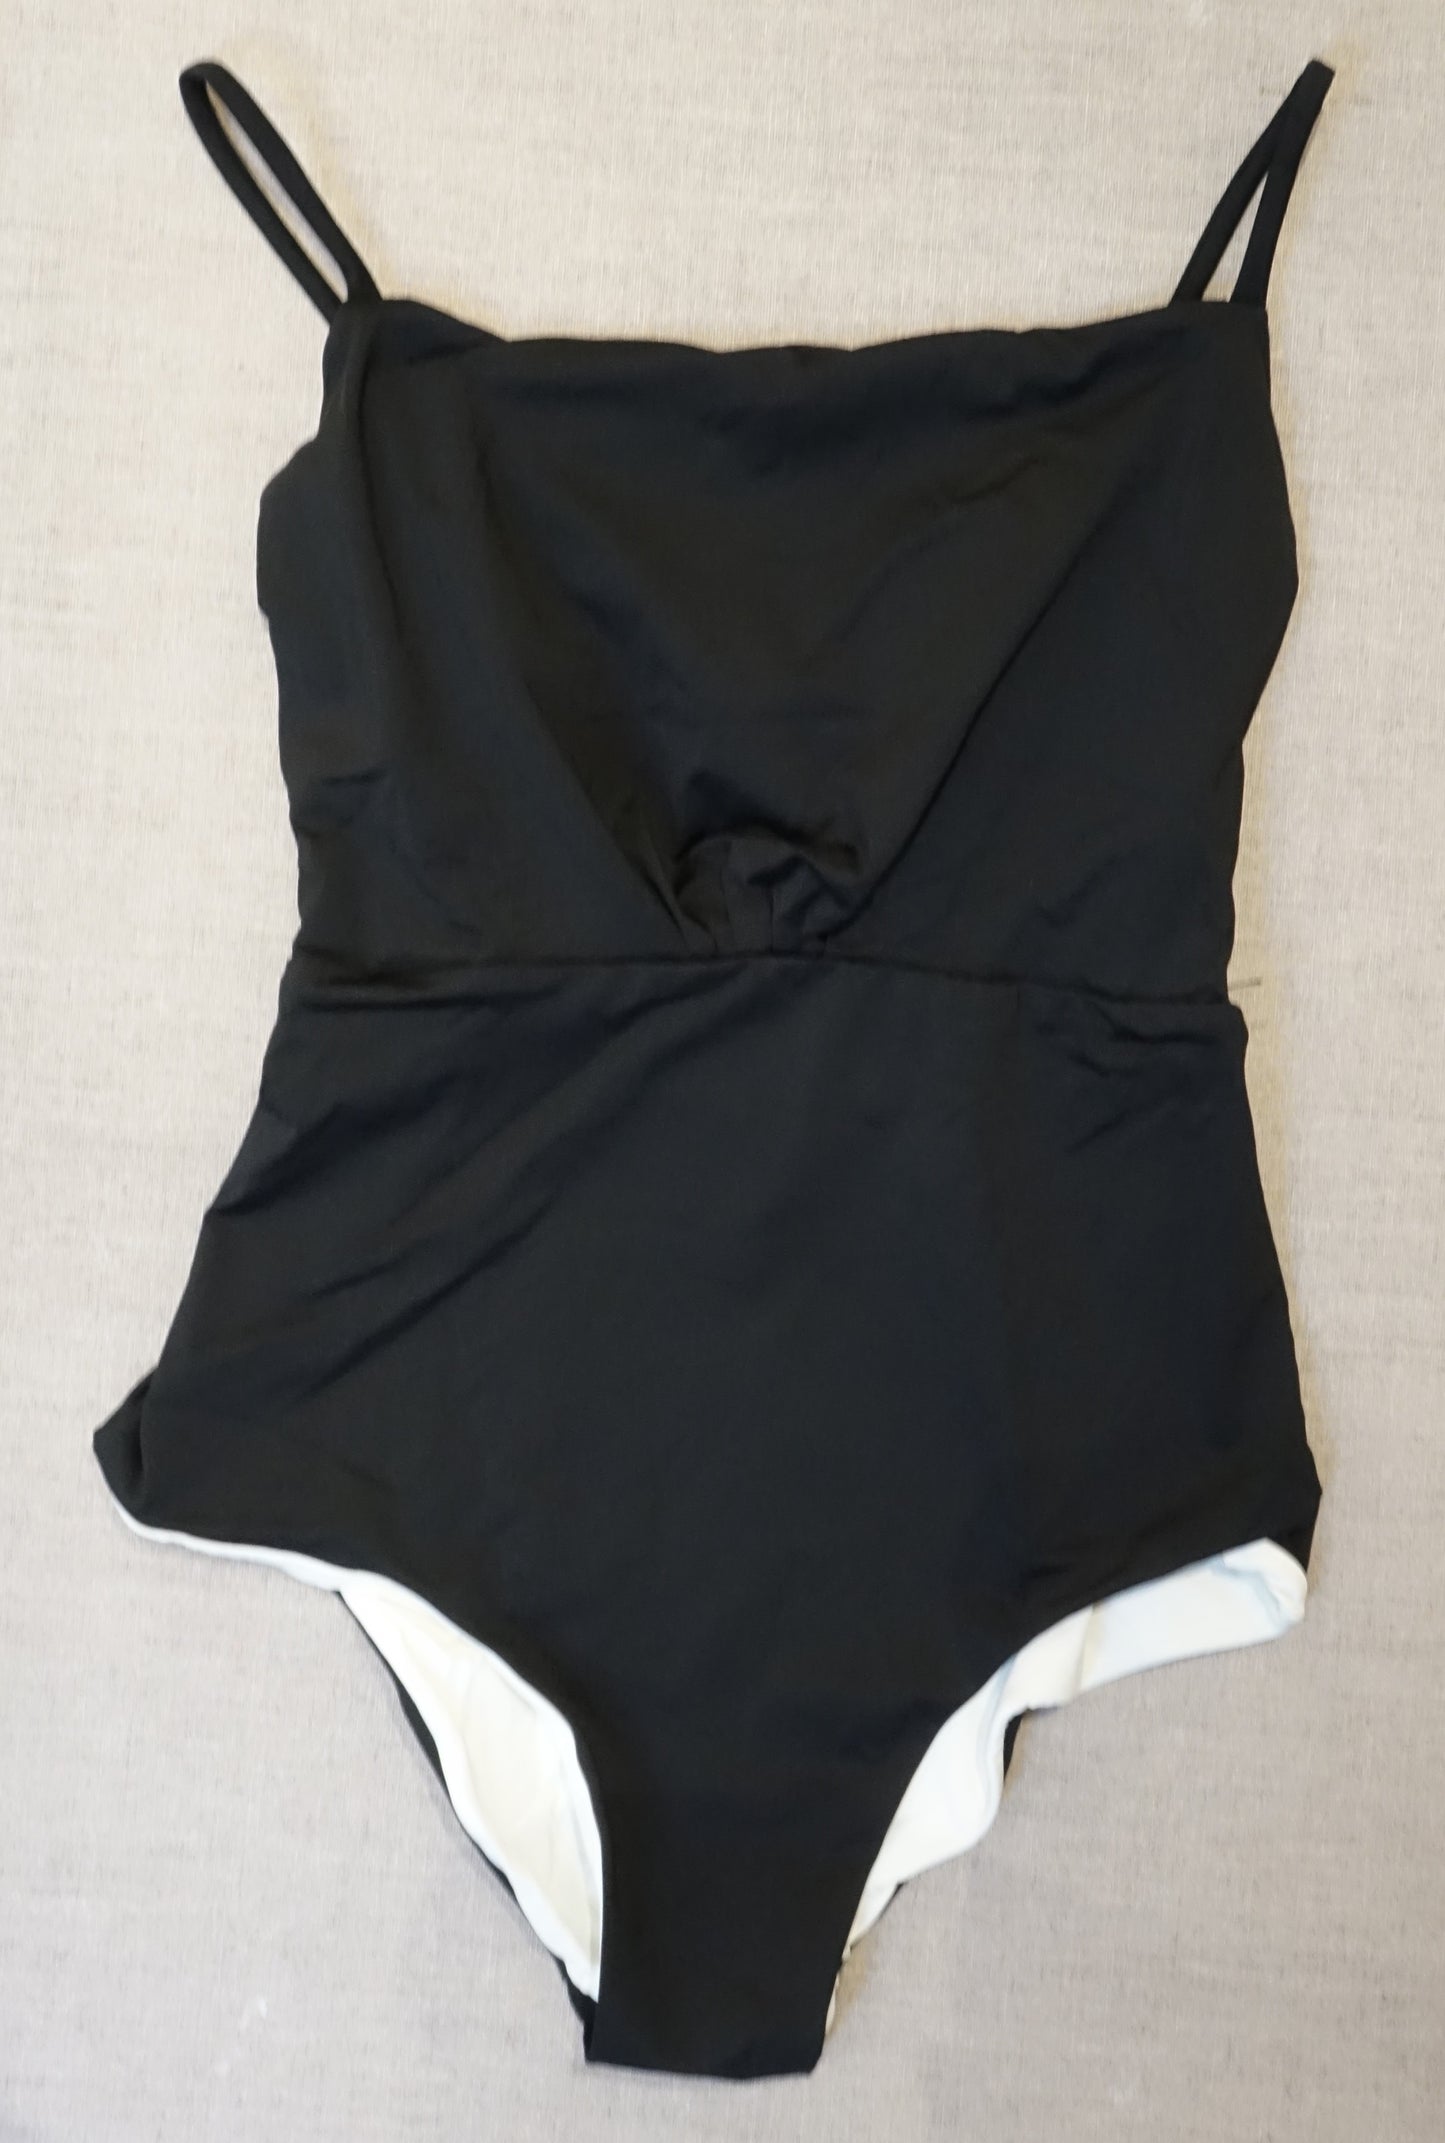 Black and turquoise "Shirley" one-piece swimsuit